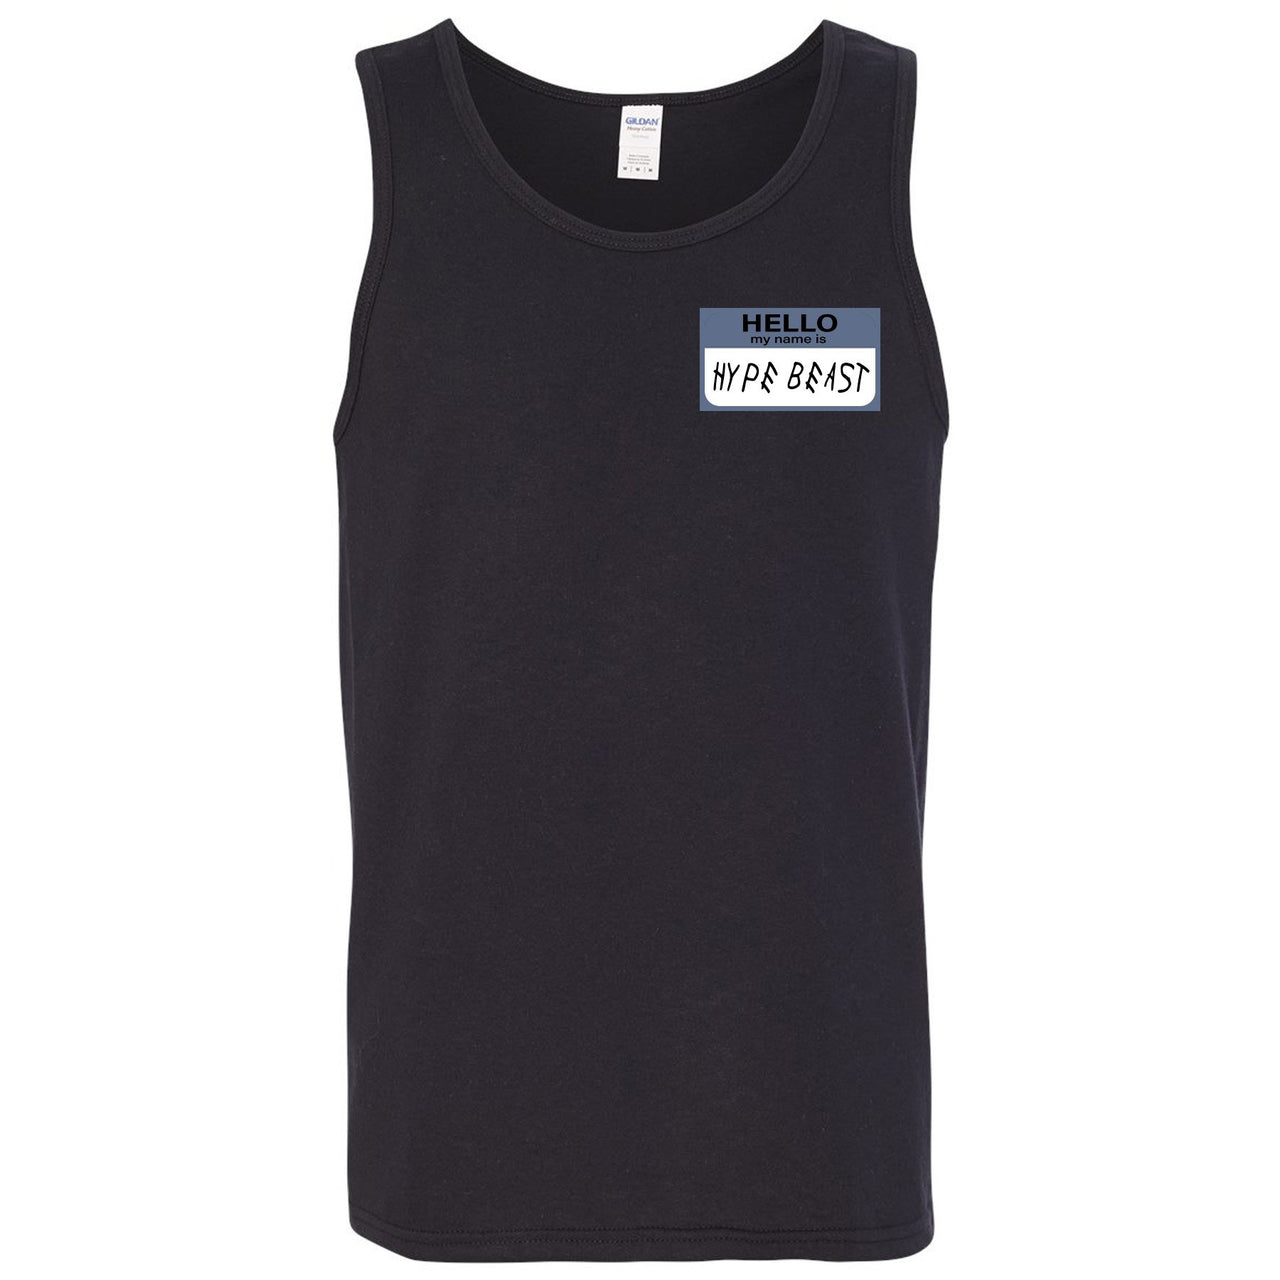 Cap and Gown 13s Mens Tank Top | Hello My Name is Hype Beast Woe Style, Black